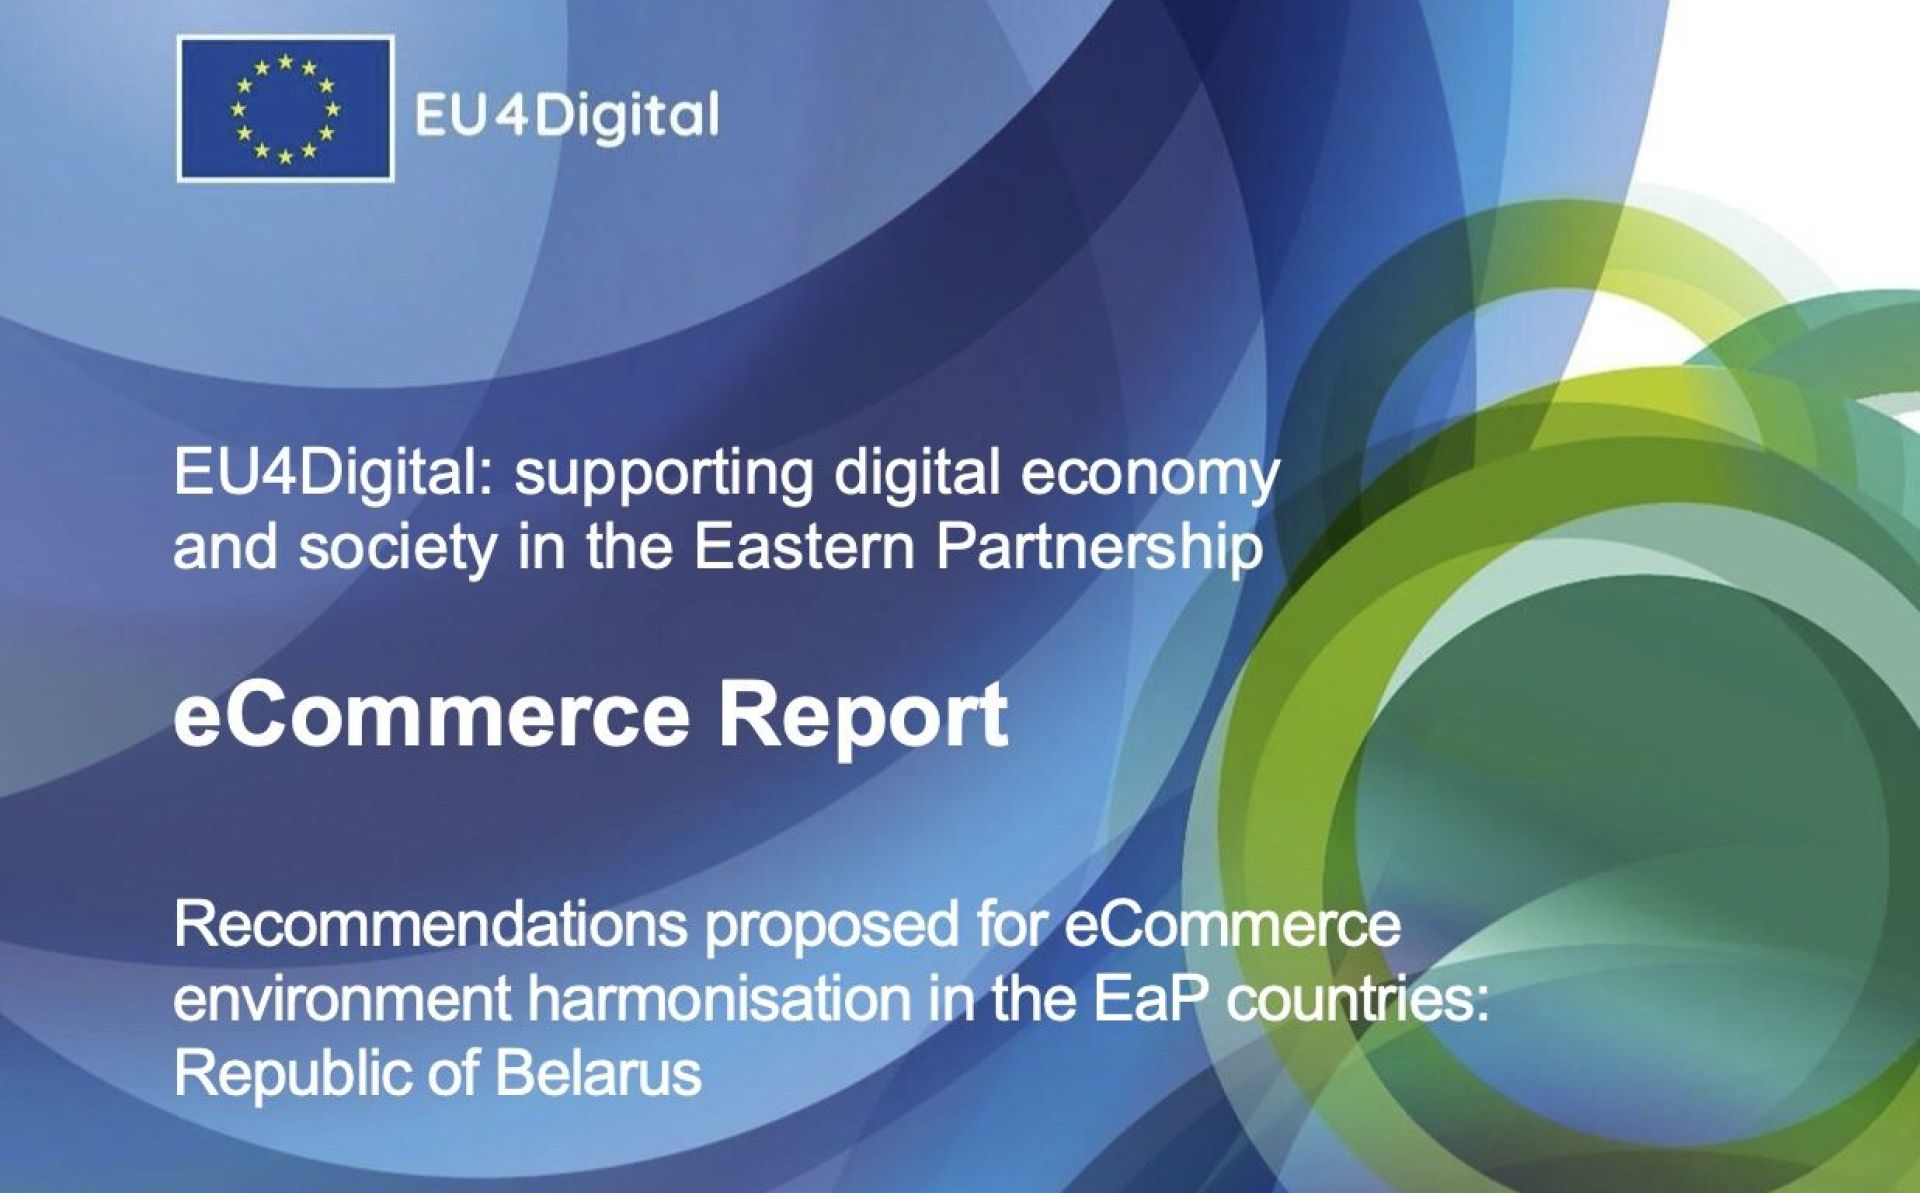 EU4Digital: Recommendations proposed for eCommerce environment harmonisation in the EaP countries – Republic of Belarus